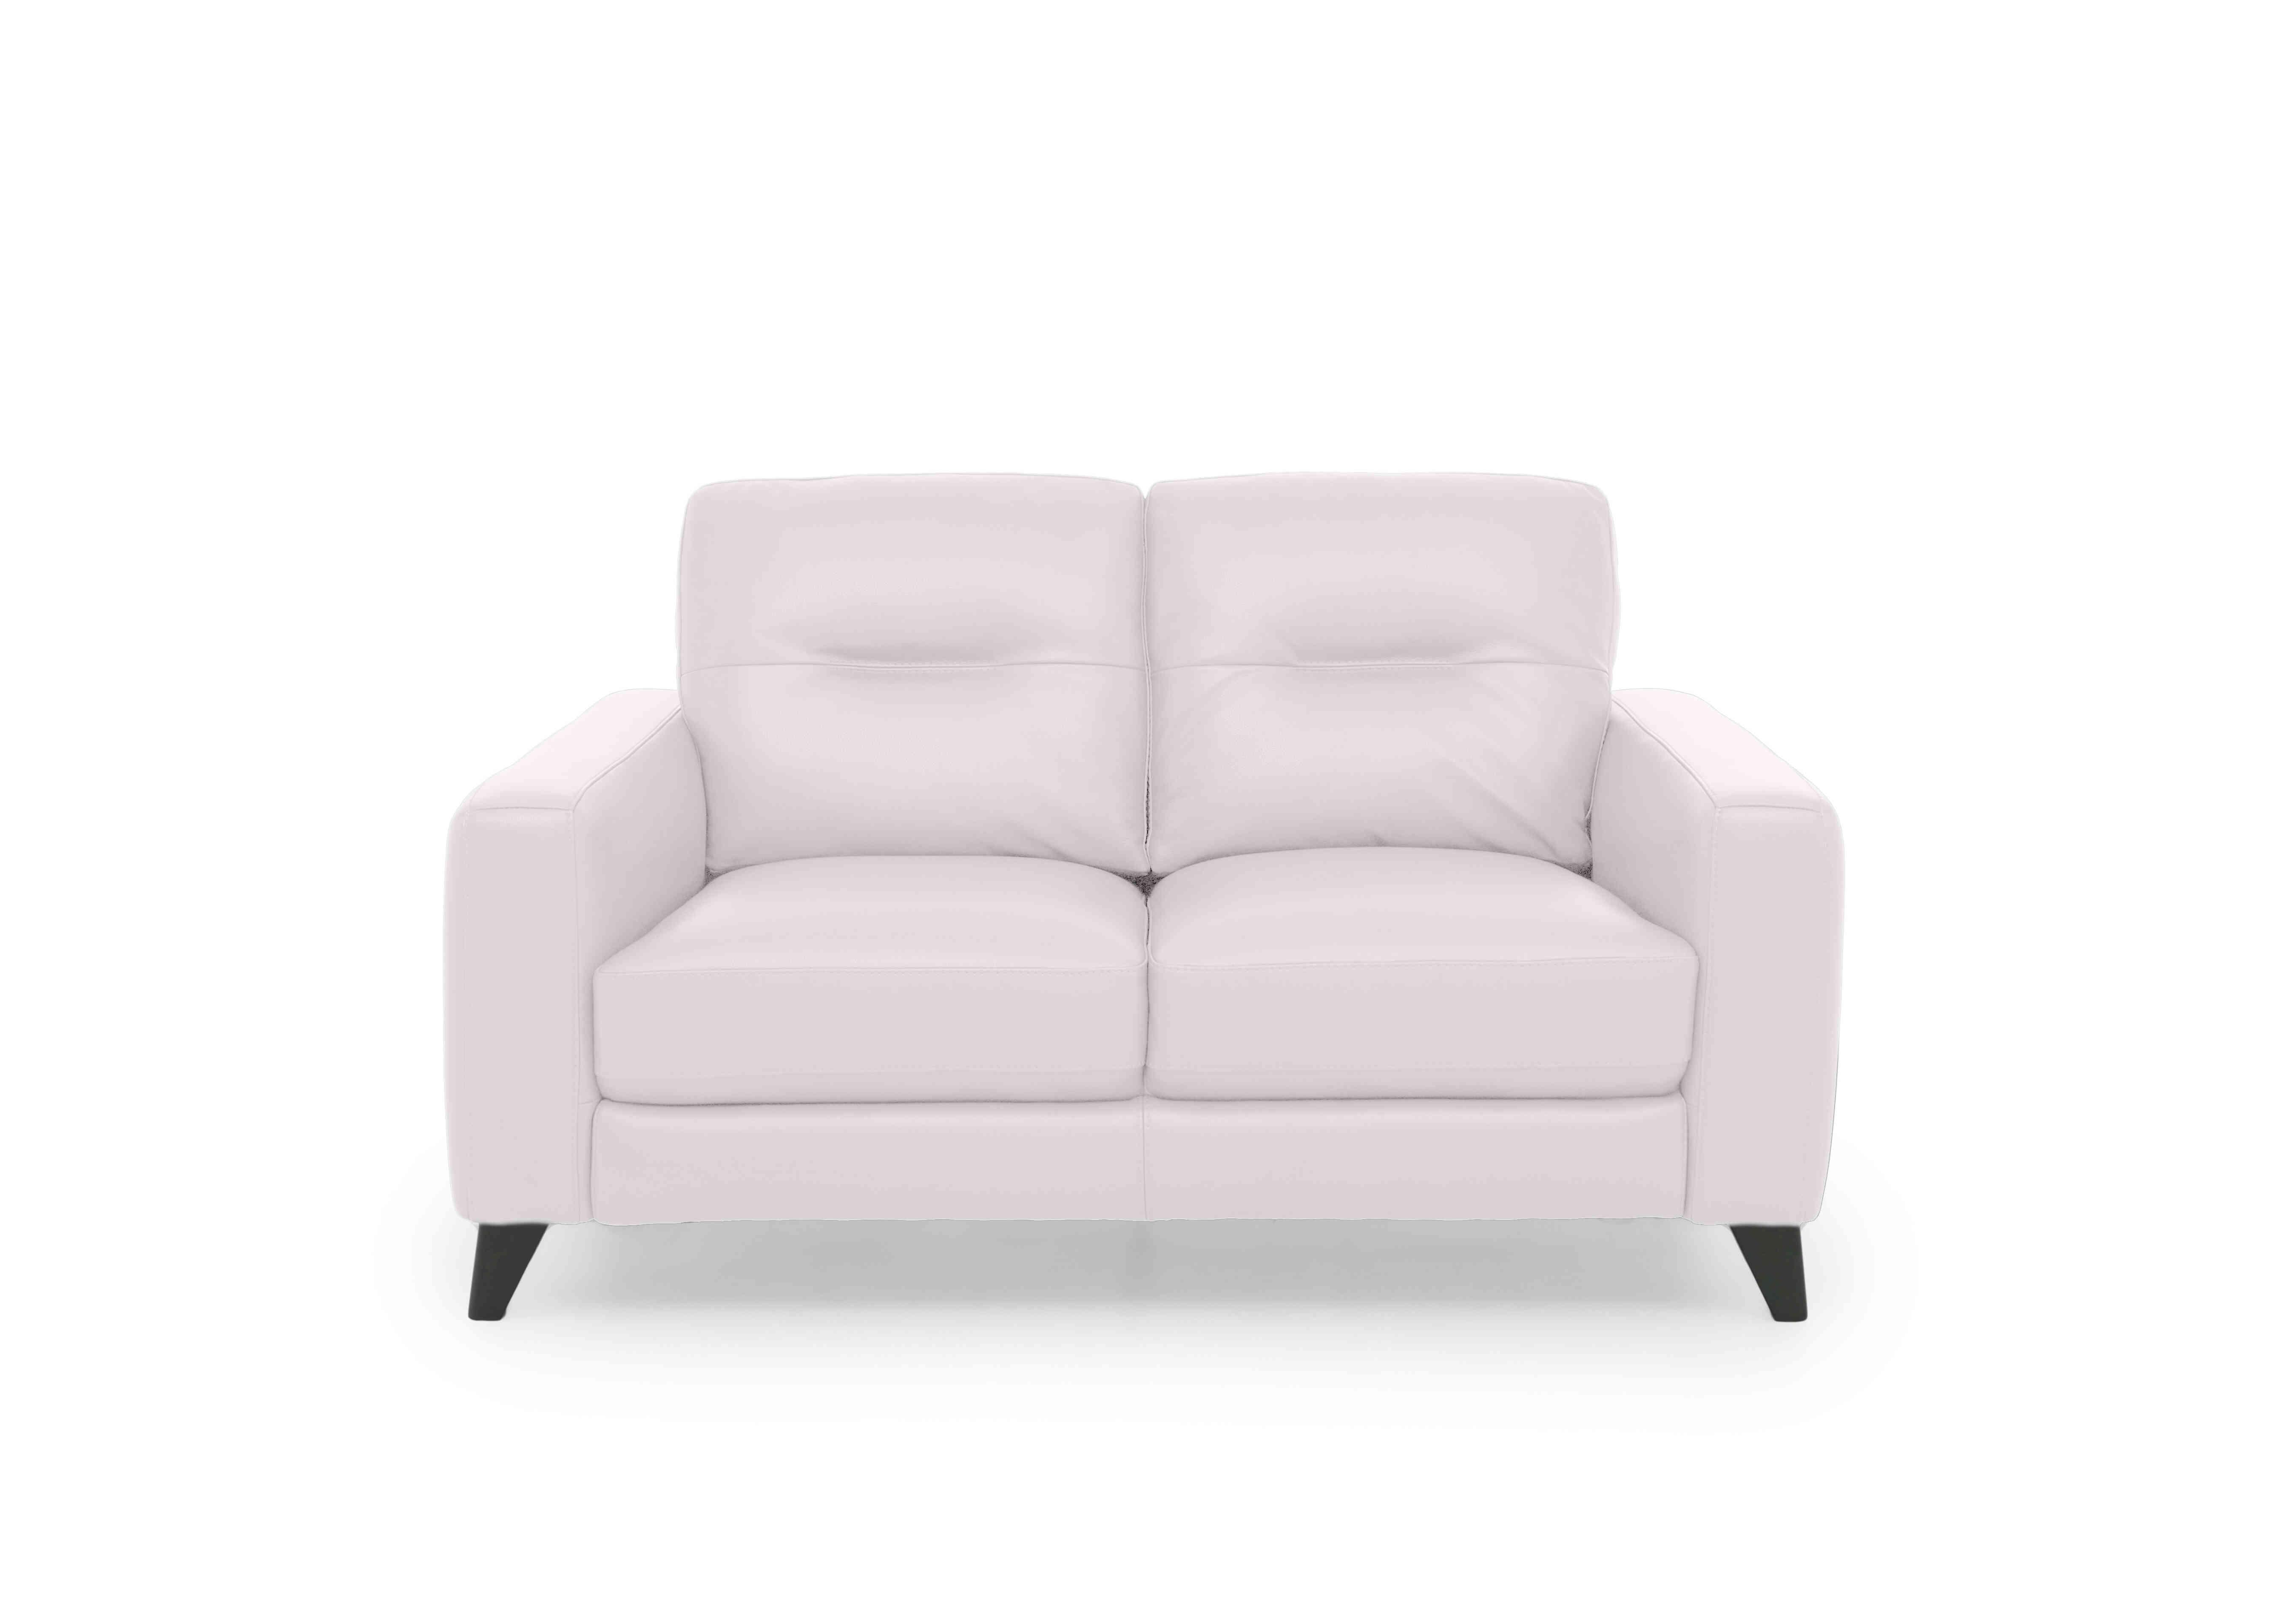 Jules 2 Seater Leather Sofa in Bv-744d Star White on Furniture Village